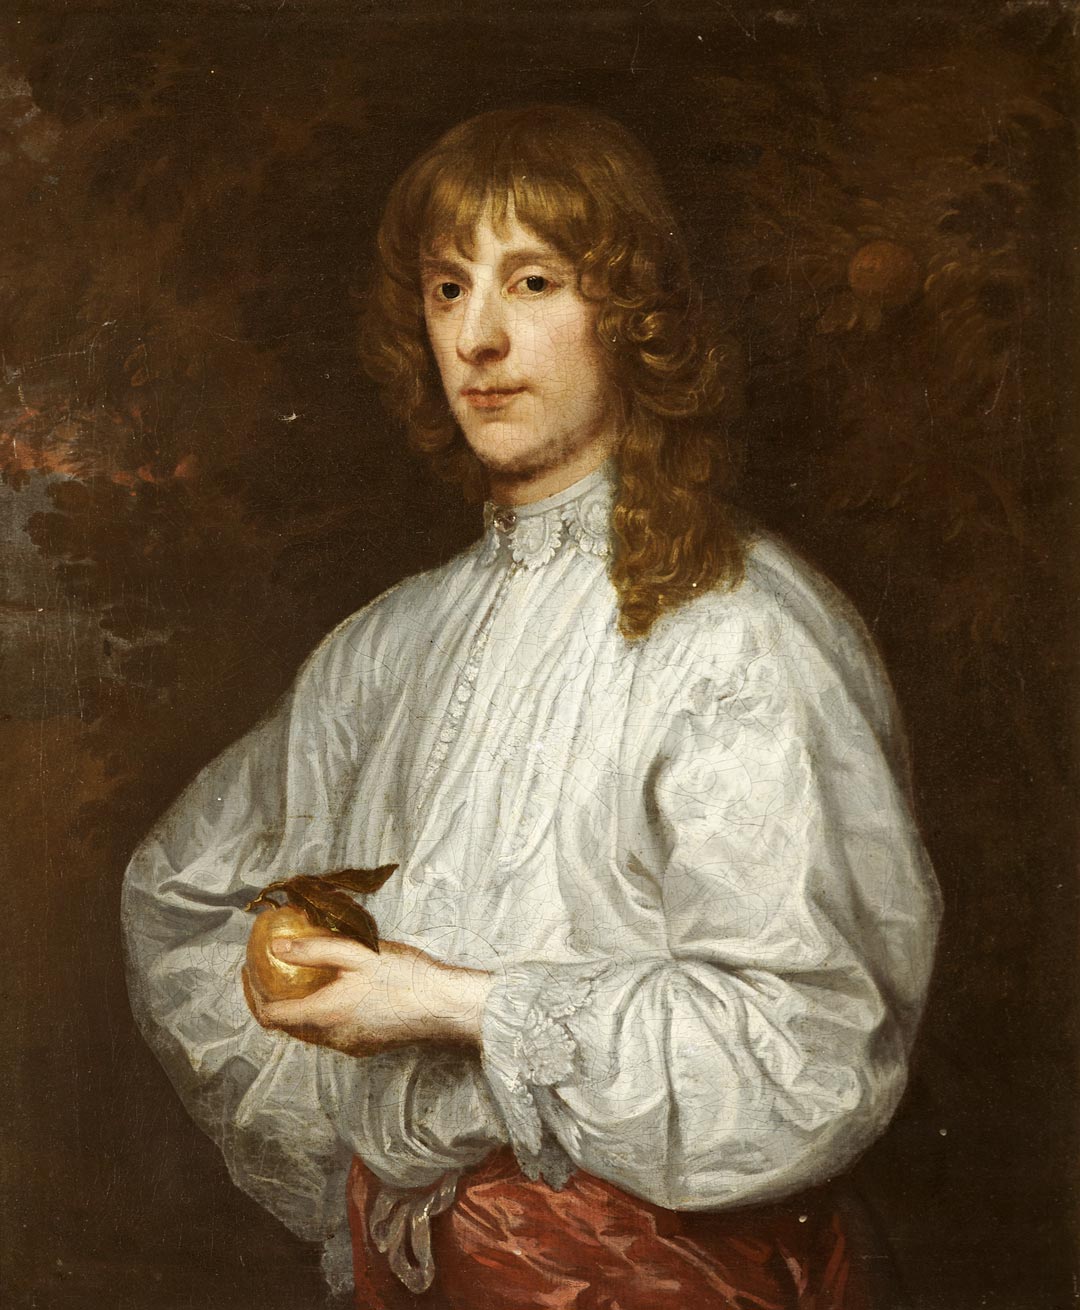 Anthony van Dyck (school of) - James Stuart, Earl of Darnley c1633 Courtesy of The Captain Christie Crawfurd English Civil War Collection, St Edwards Hall © Stow-on-the Wold, UK